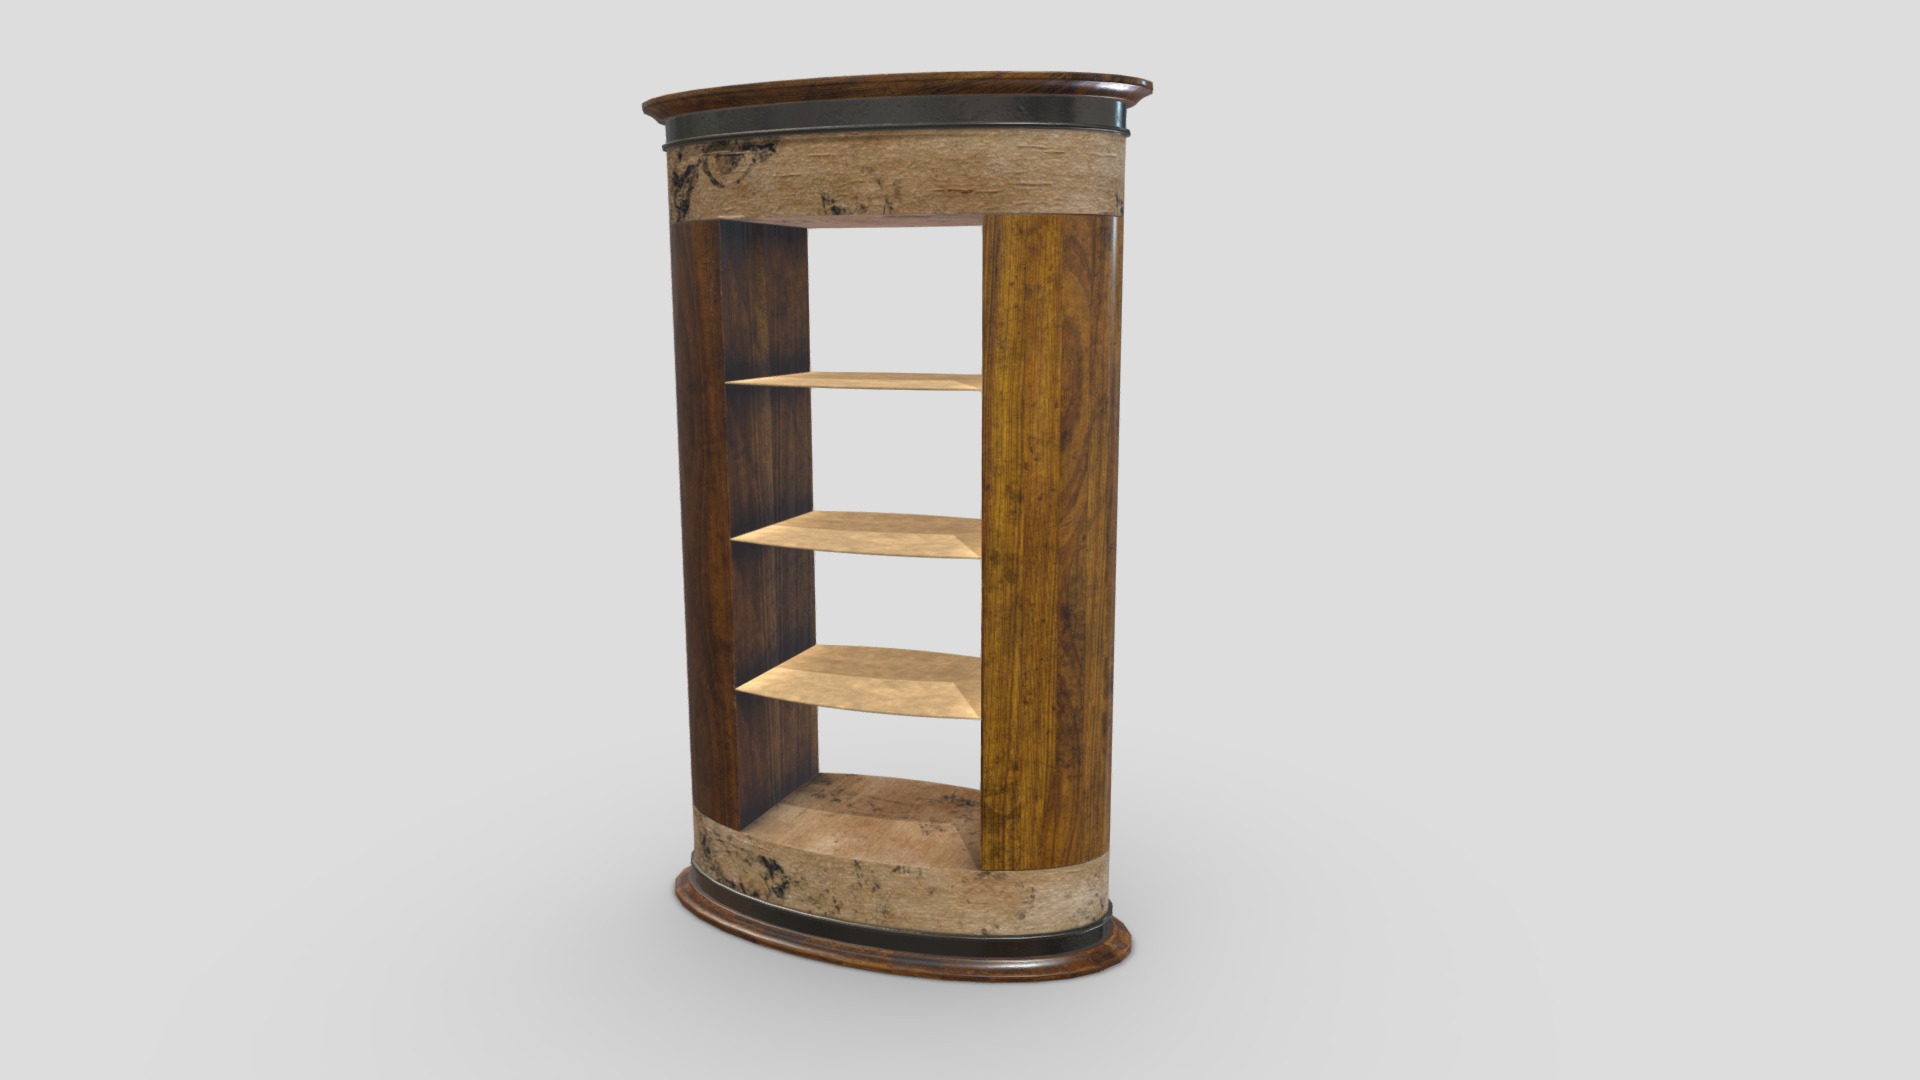 3D model Antique Cupboard 52 - This is a 3D model of the Antique Cupboard 52. The 3D model is about a wooden shelf with a wooden top.